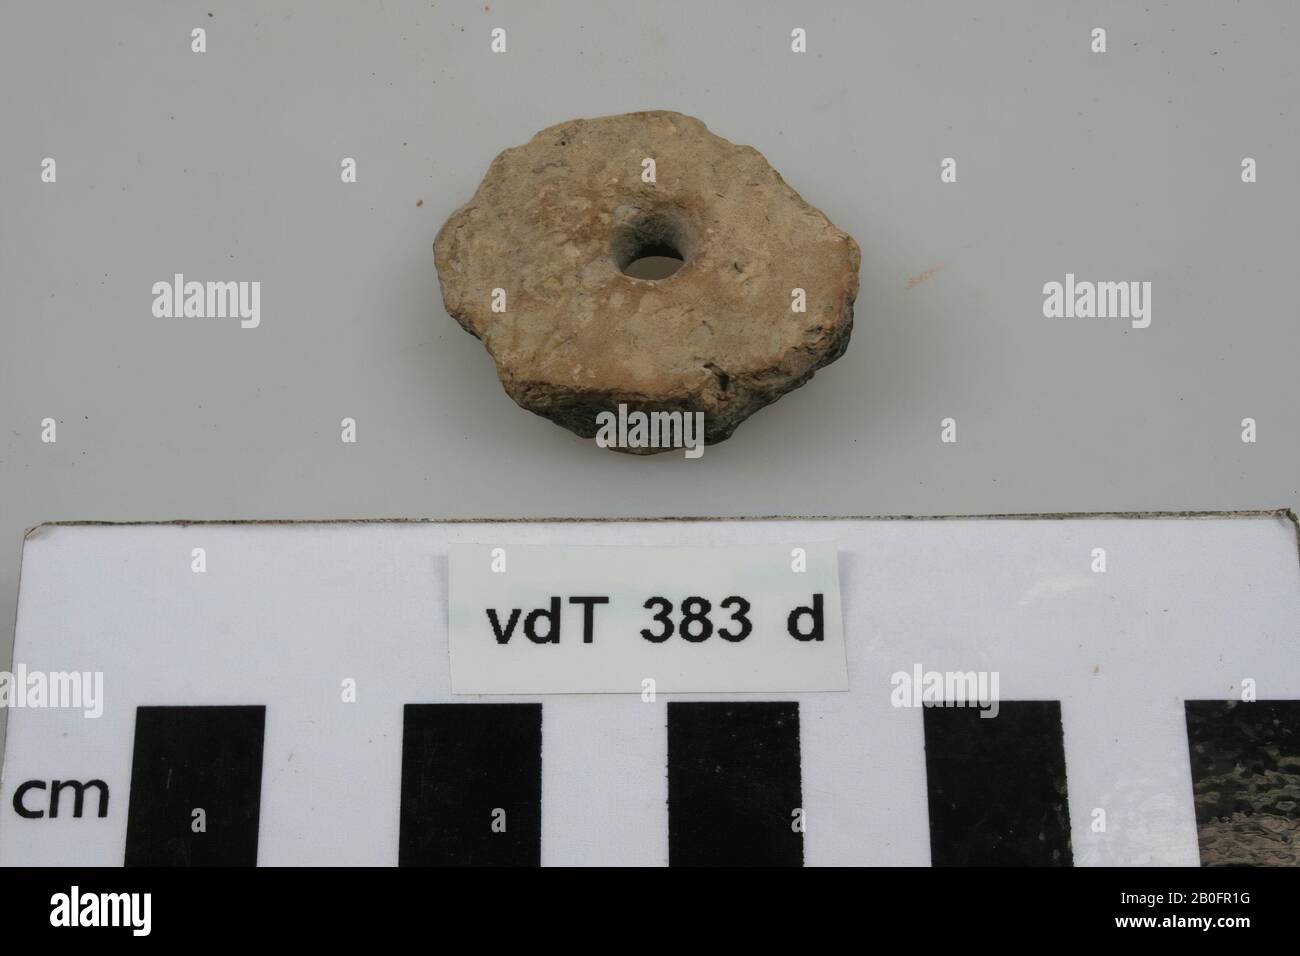 Earthenware disc with perforation in the middle., disk, earthenware, h: 1 cm, diam: 3,5 cm, vme, Netherlands, Friesland, Ferwerderadiel, Lichtaard Stock Photo